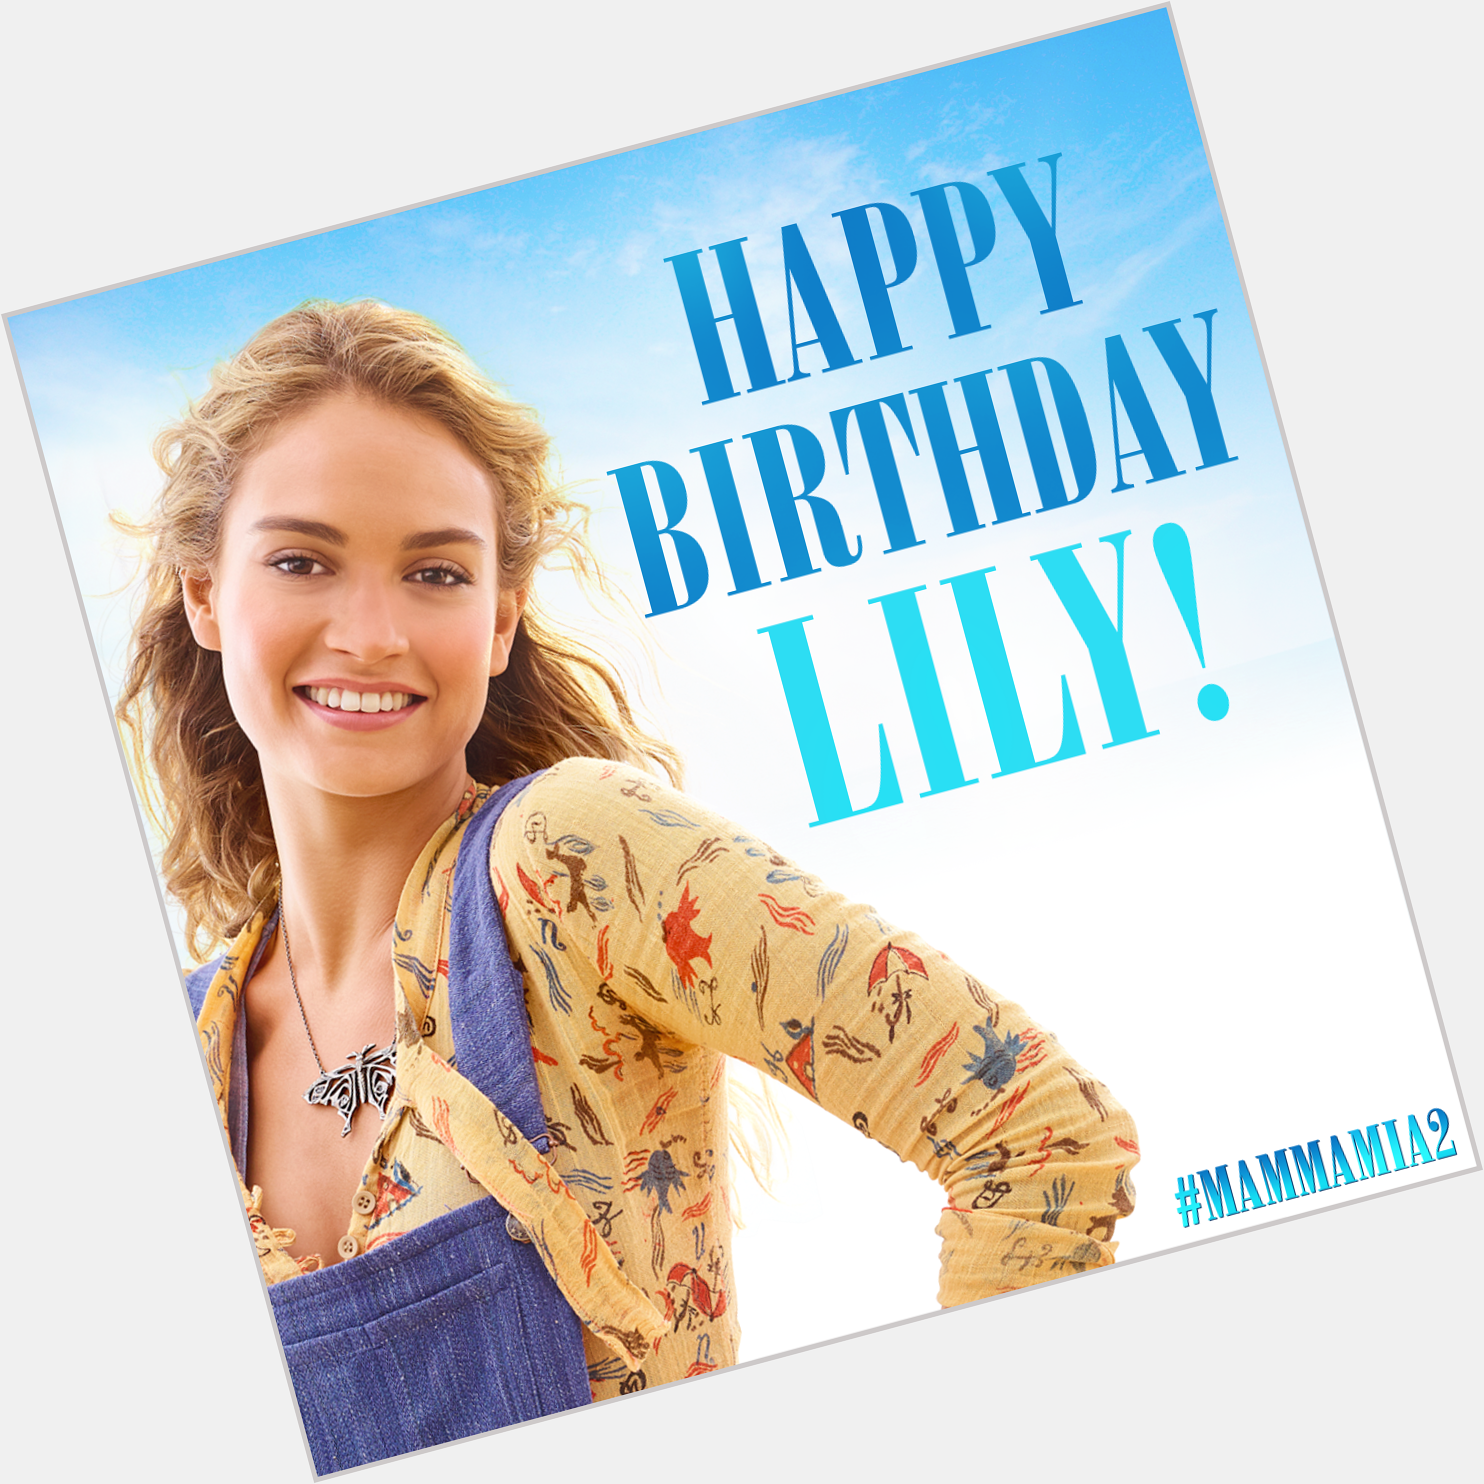 Happy Birthday to our young Donna, Lily James! 